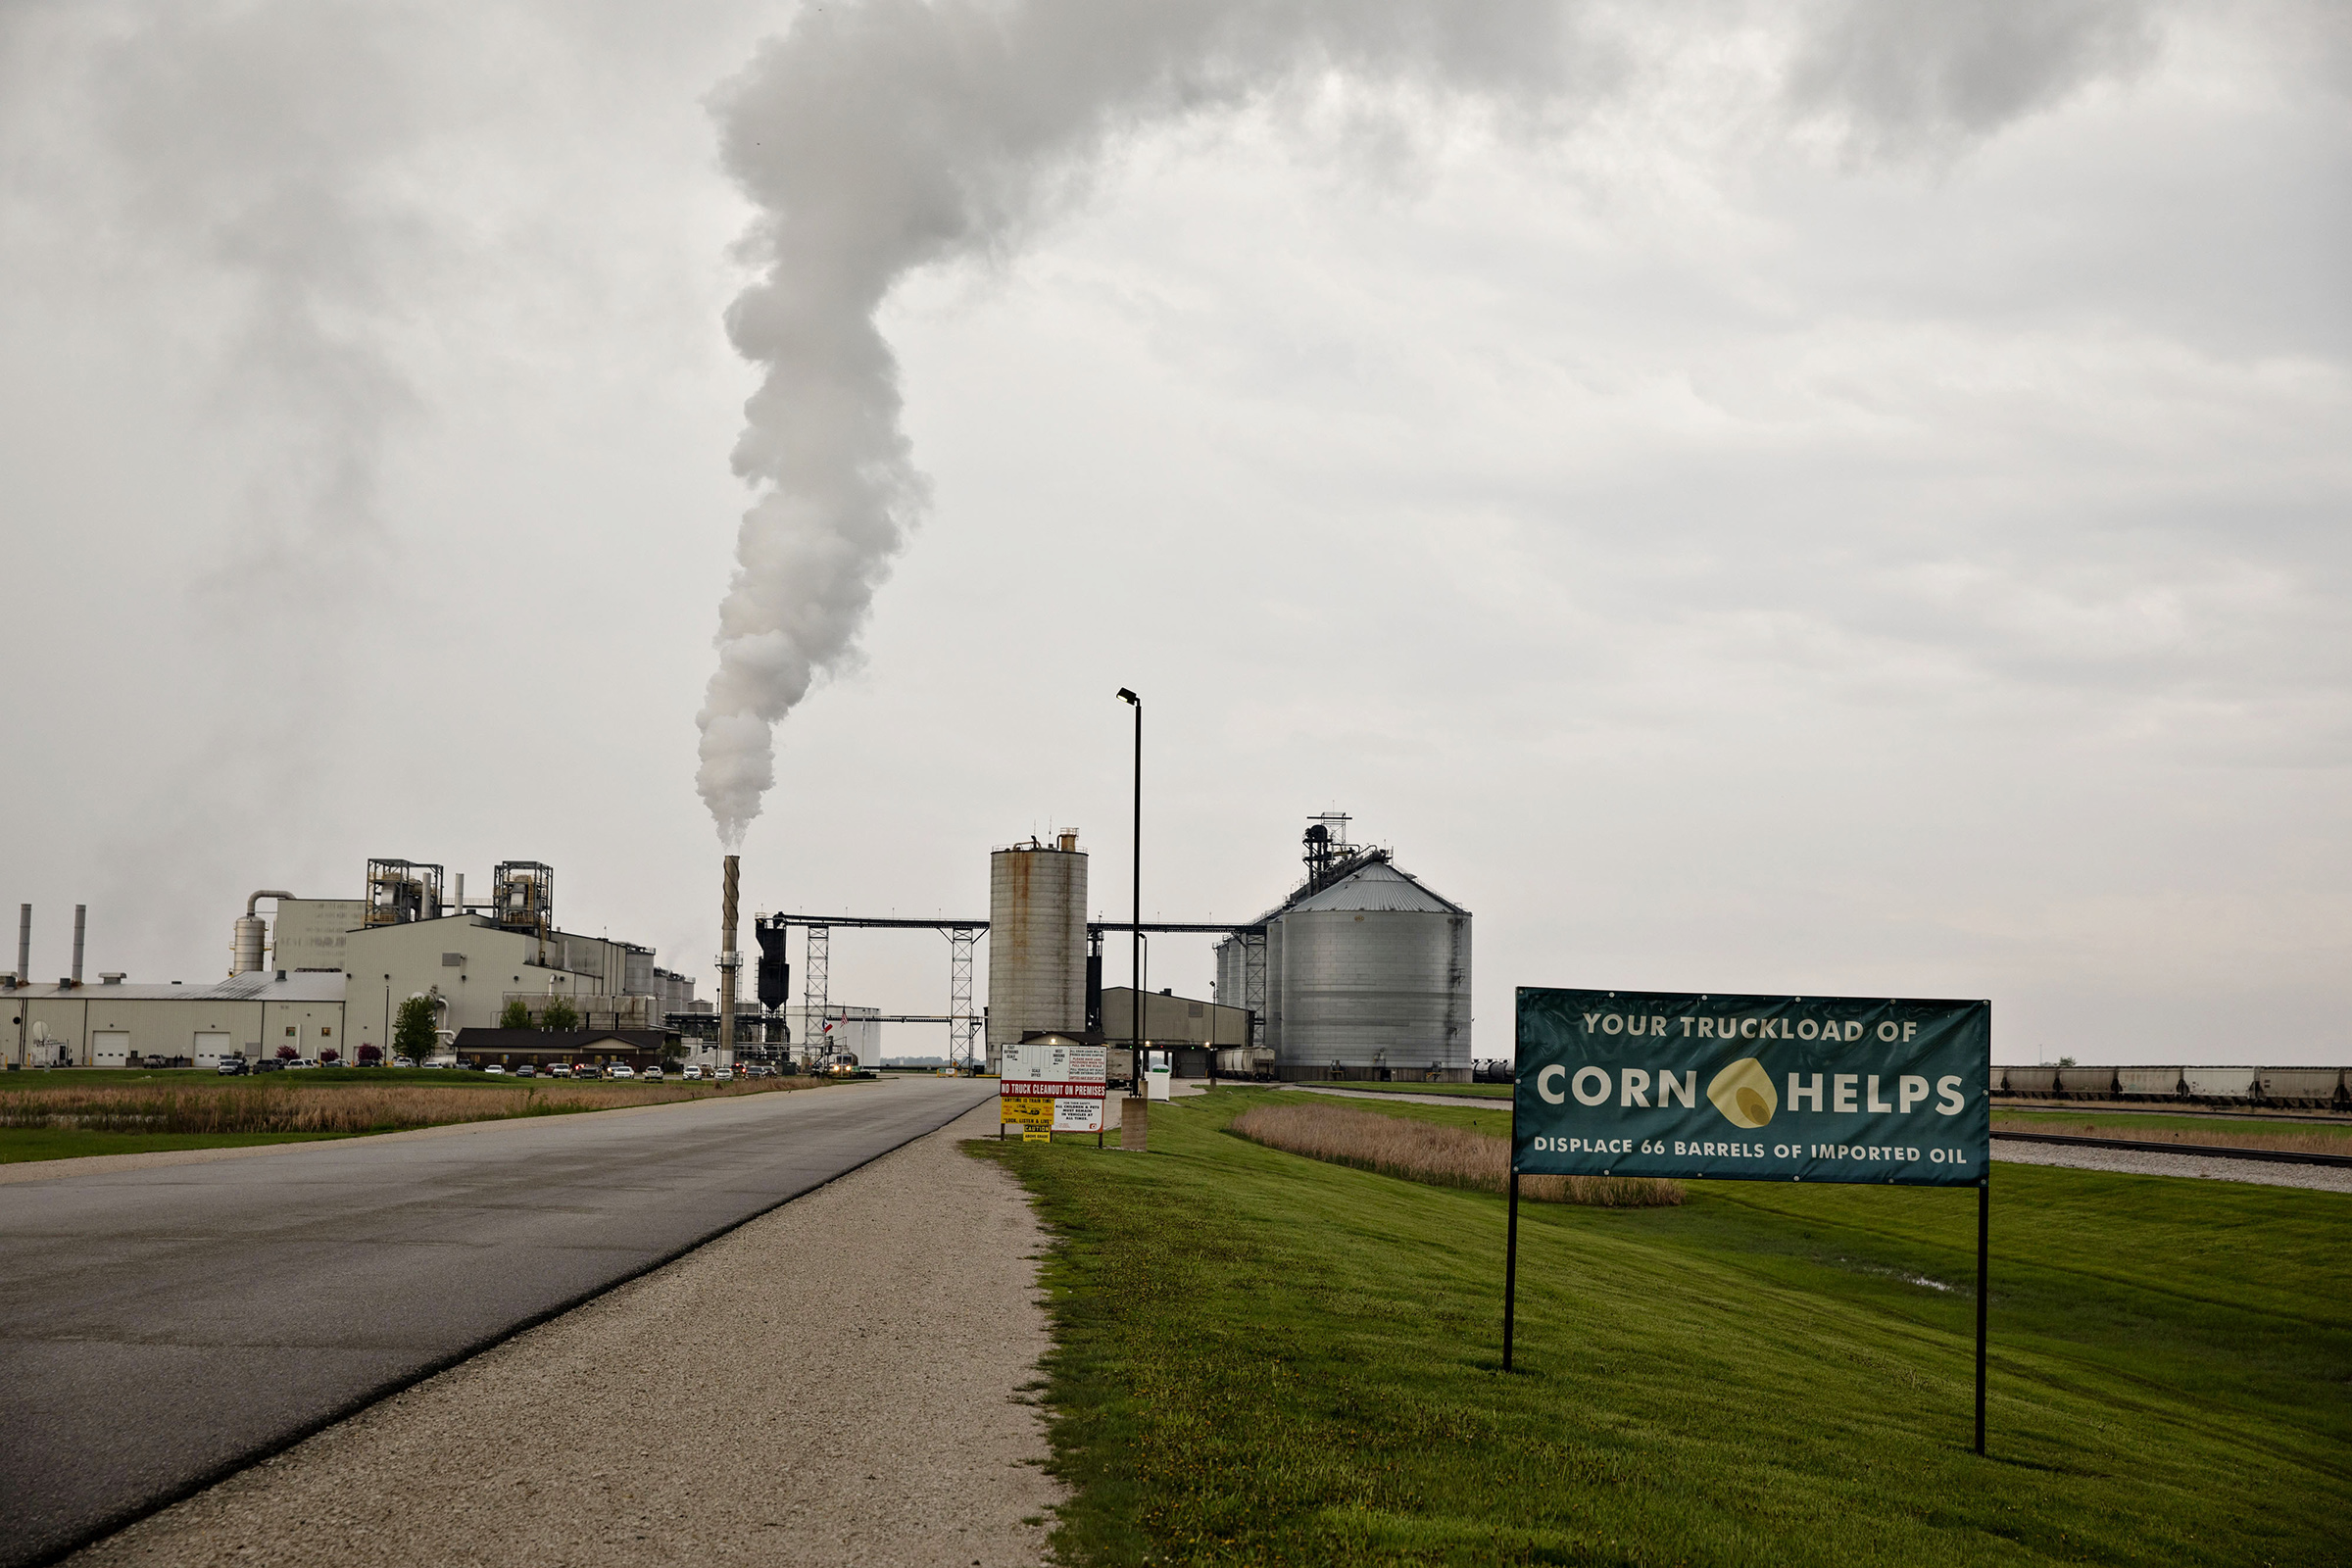 Steam rises from a stack outside the POET LLC ethanol biorefinery in Gowrie, Iowa, on May 17, 2019. (Daniel Acker—Bloomberg/Getty Images)